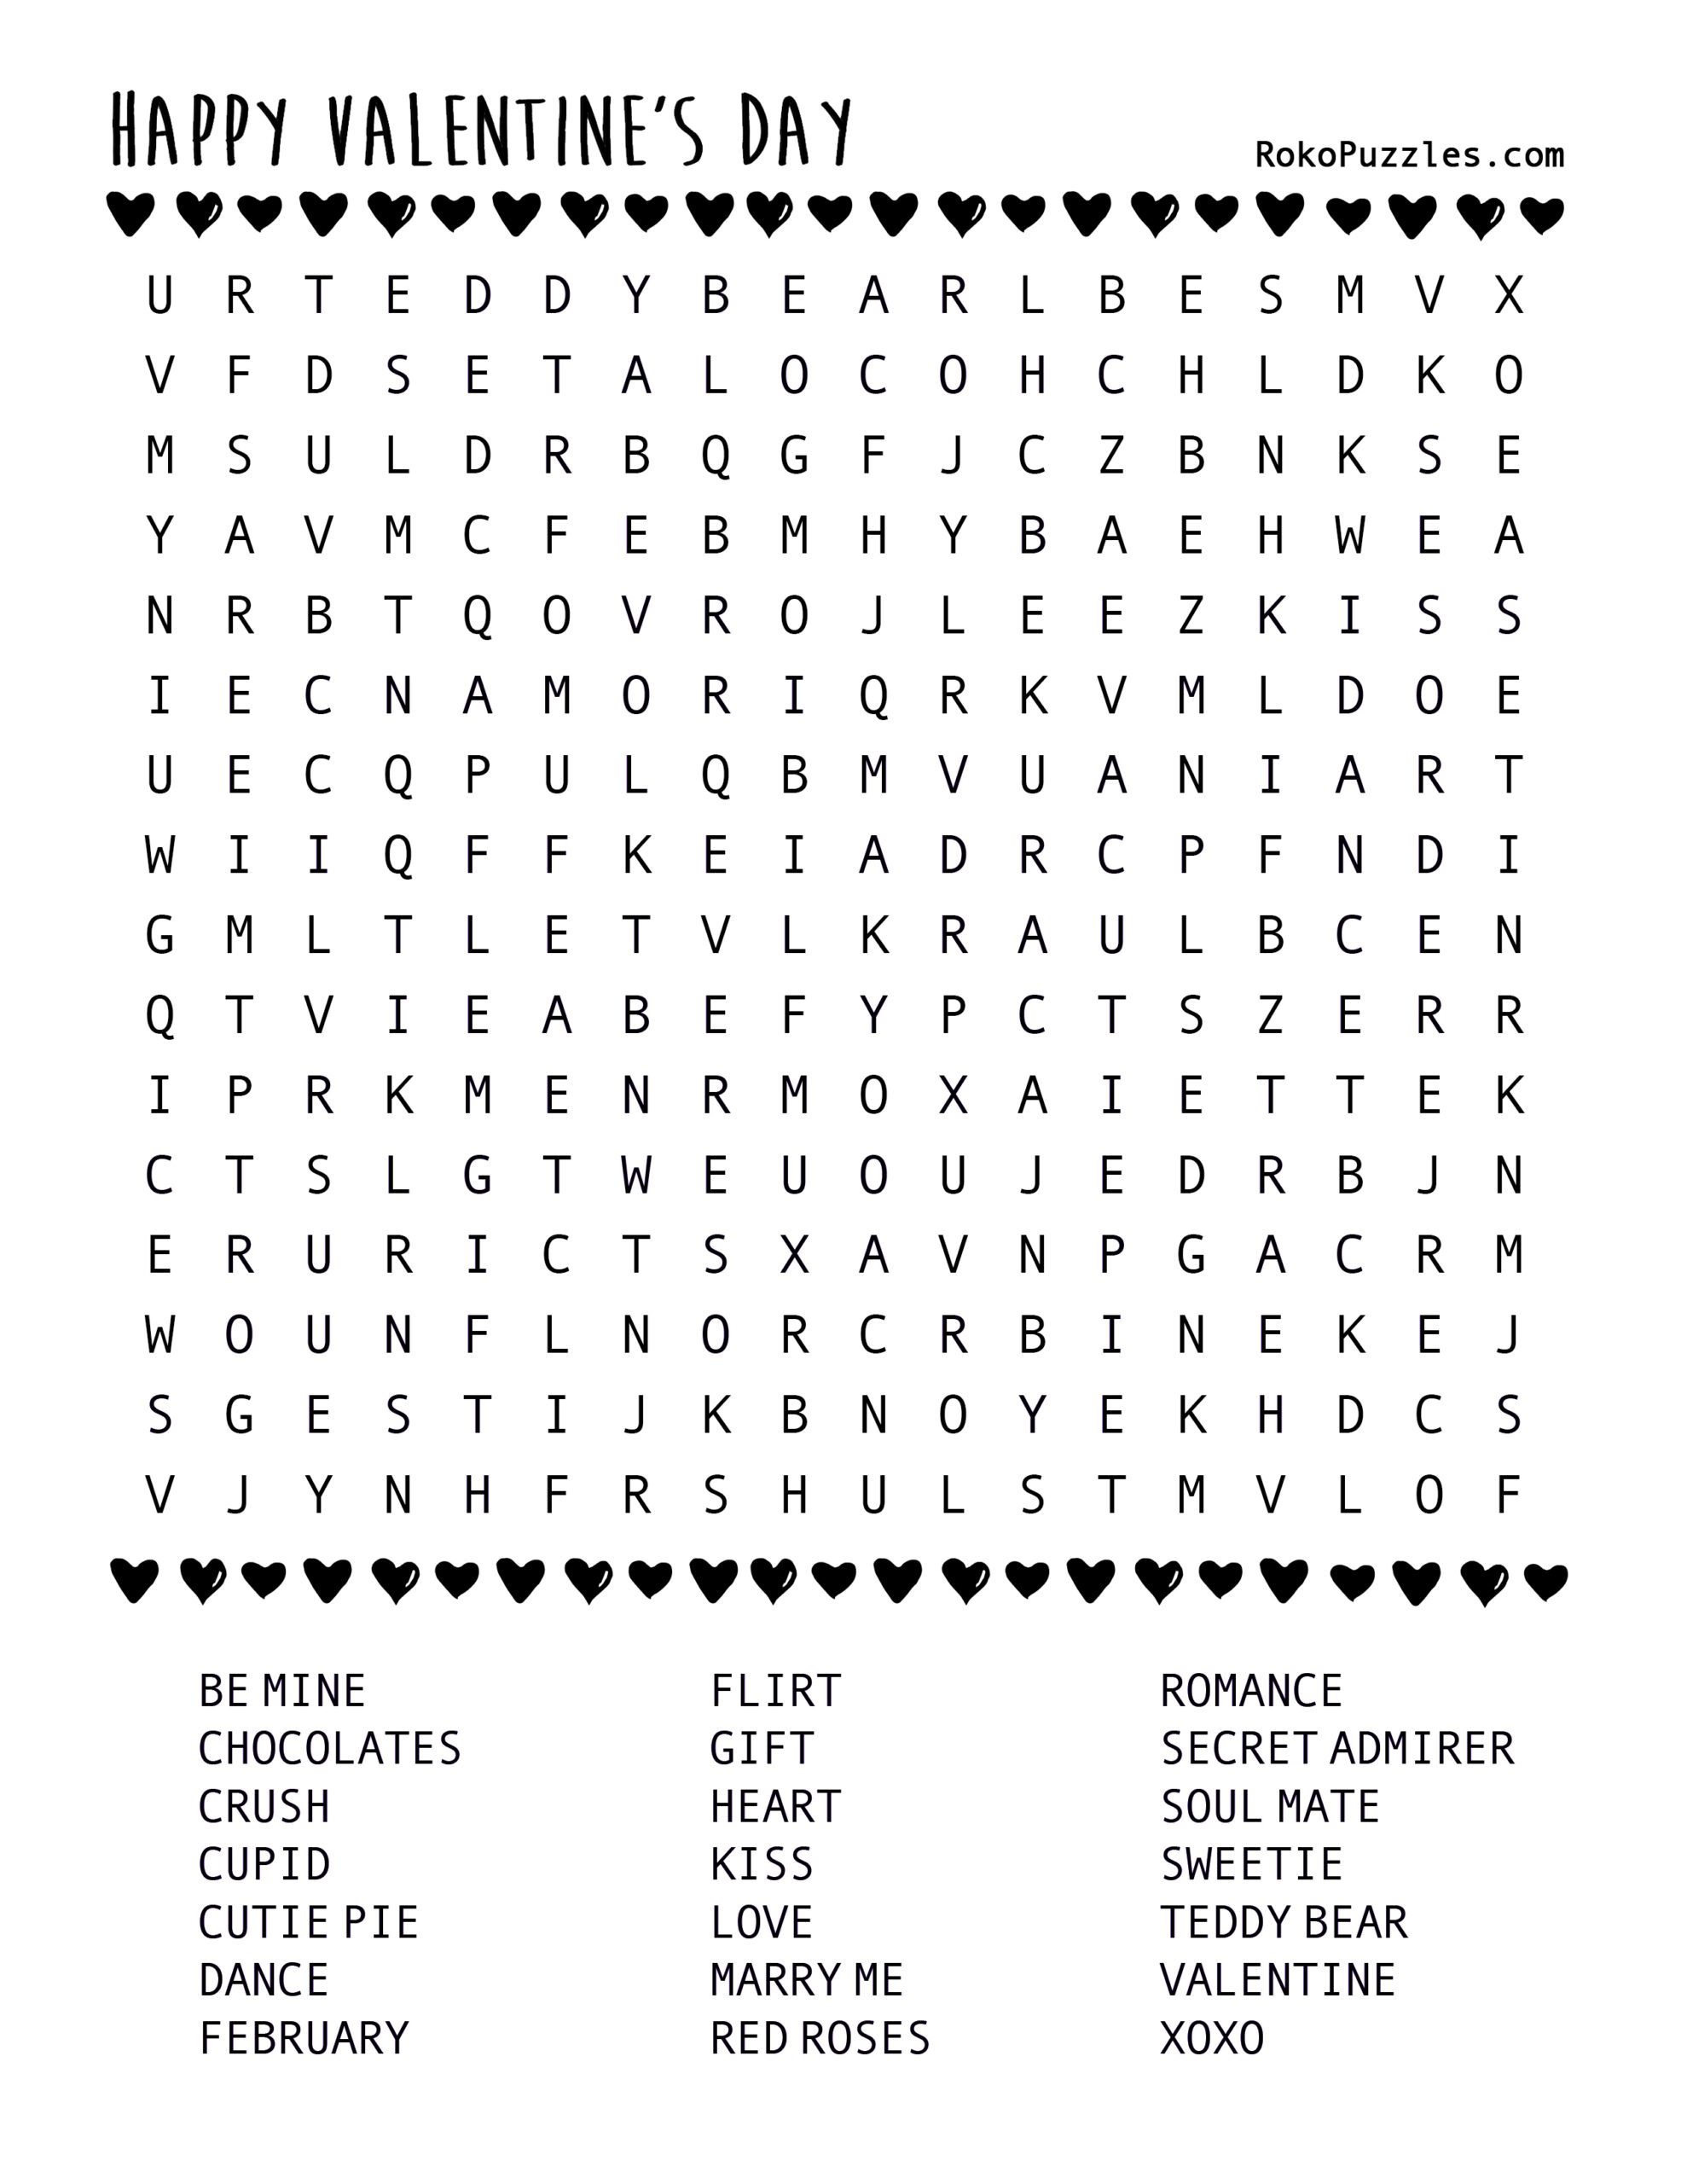 valentine-s-day-word-search-free-printable-download-rokopuzzles